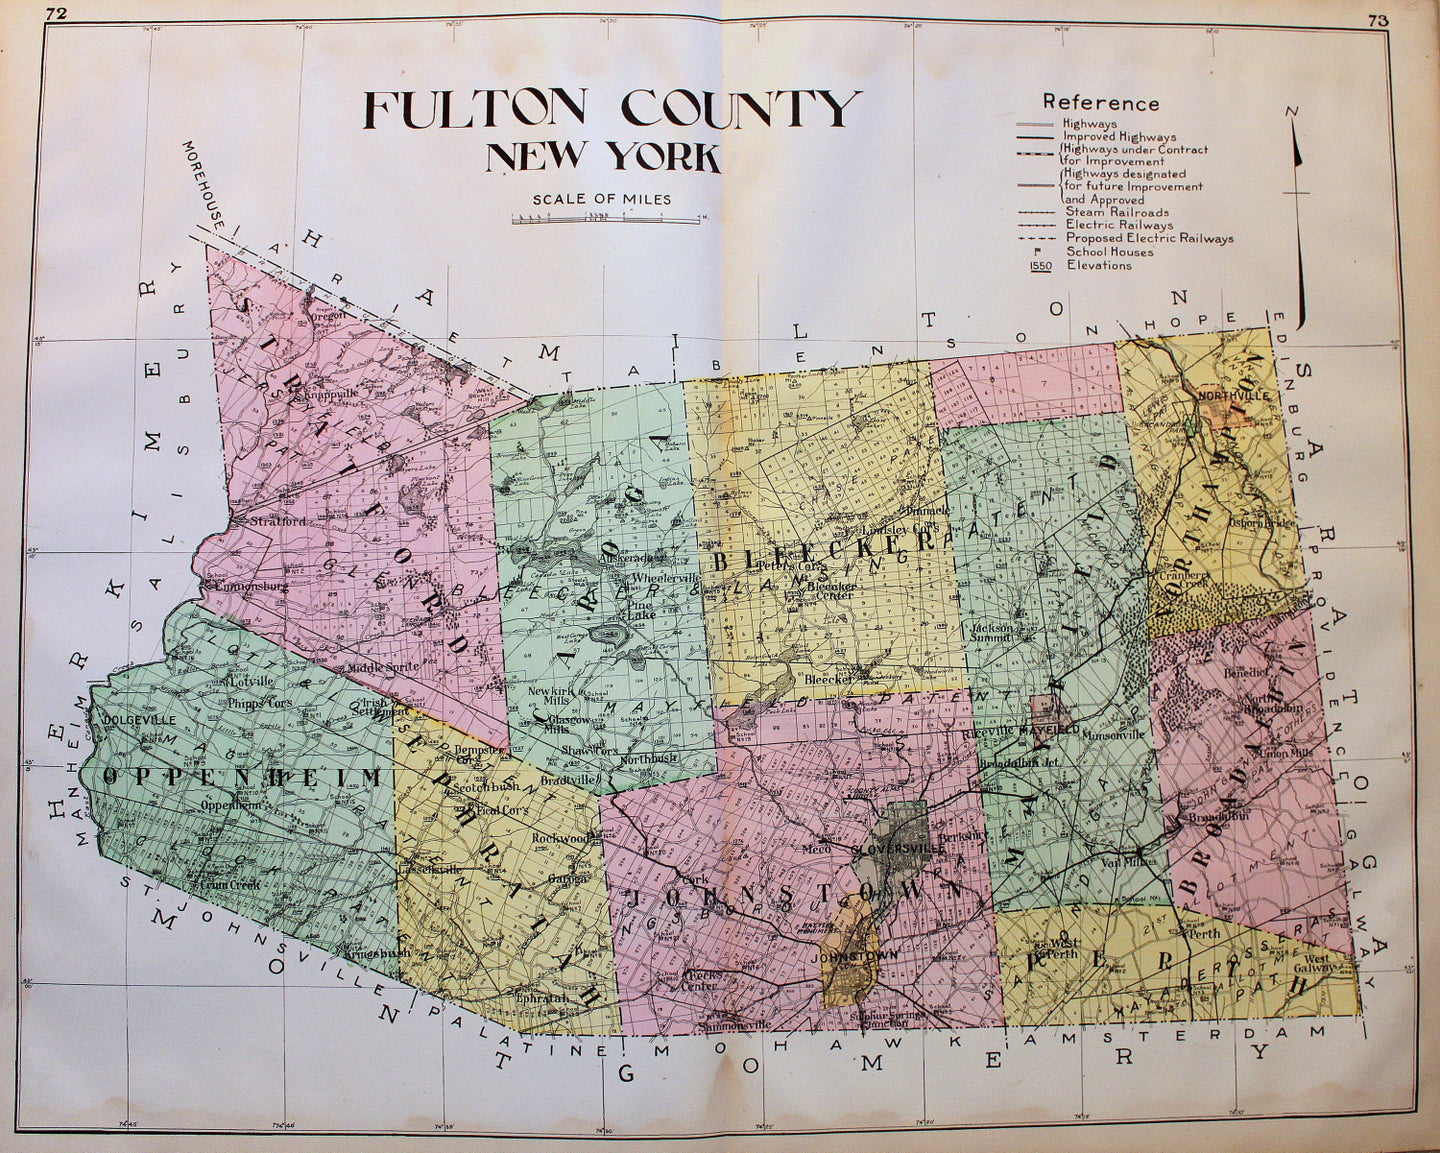 Antique-Hand-Colored-Map-Fulton-County-New-York-United-States-New-York-1911-Everts-Maps-Of-Antiquity